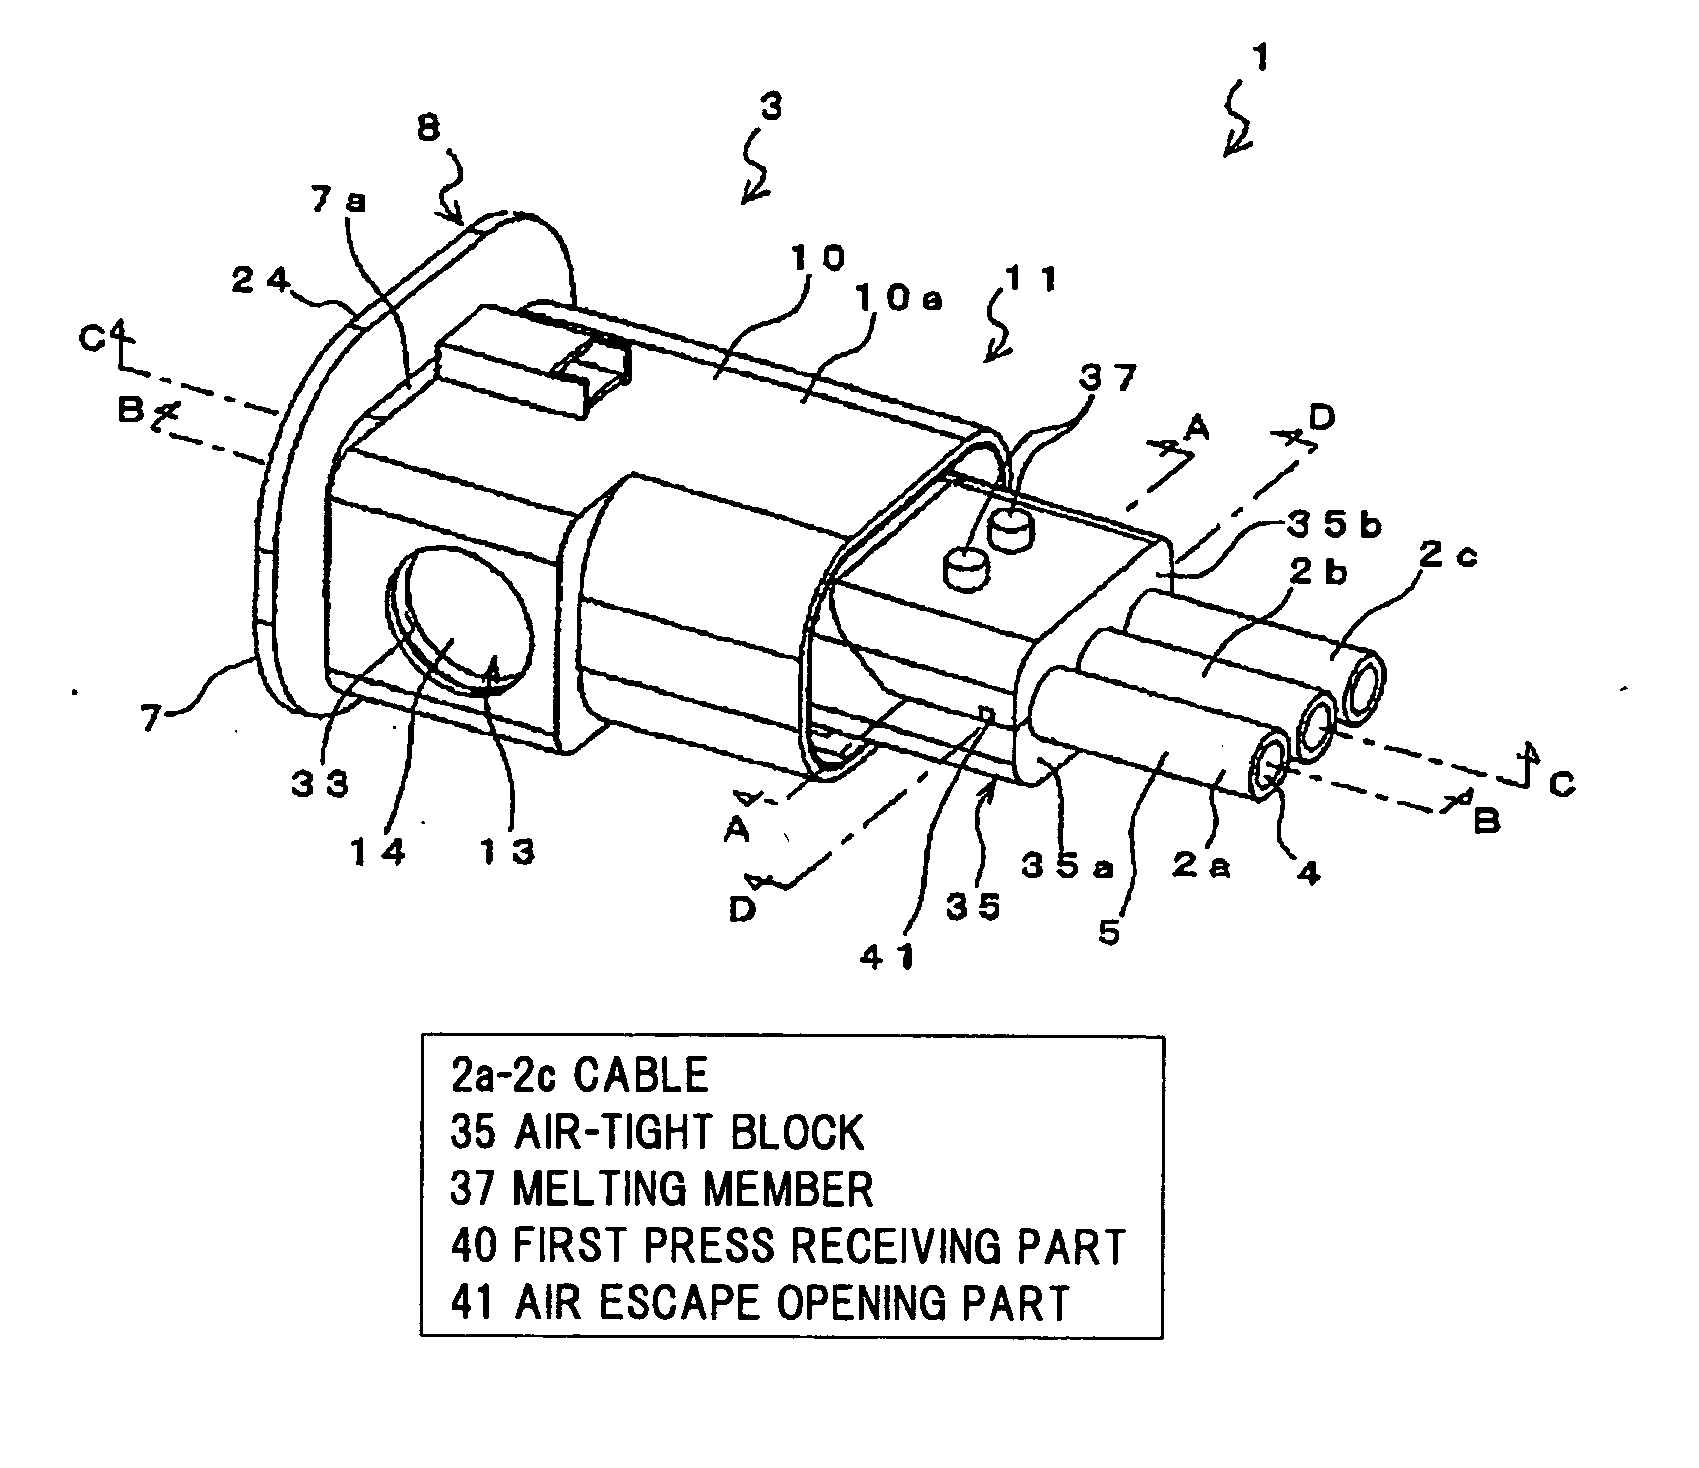 Wire harness and method of manufacturing the same